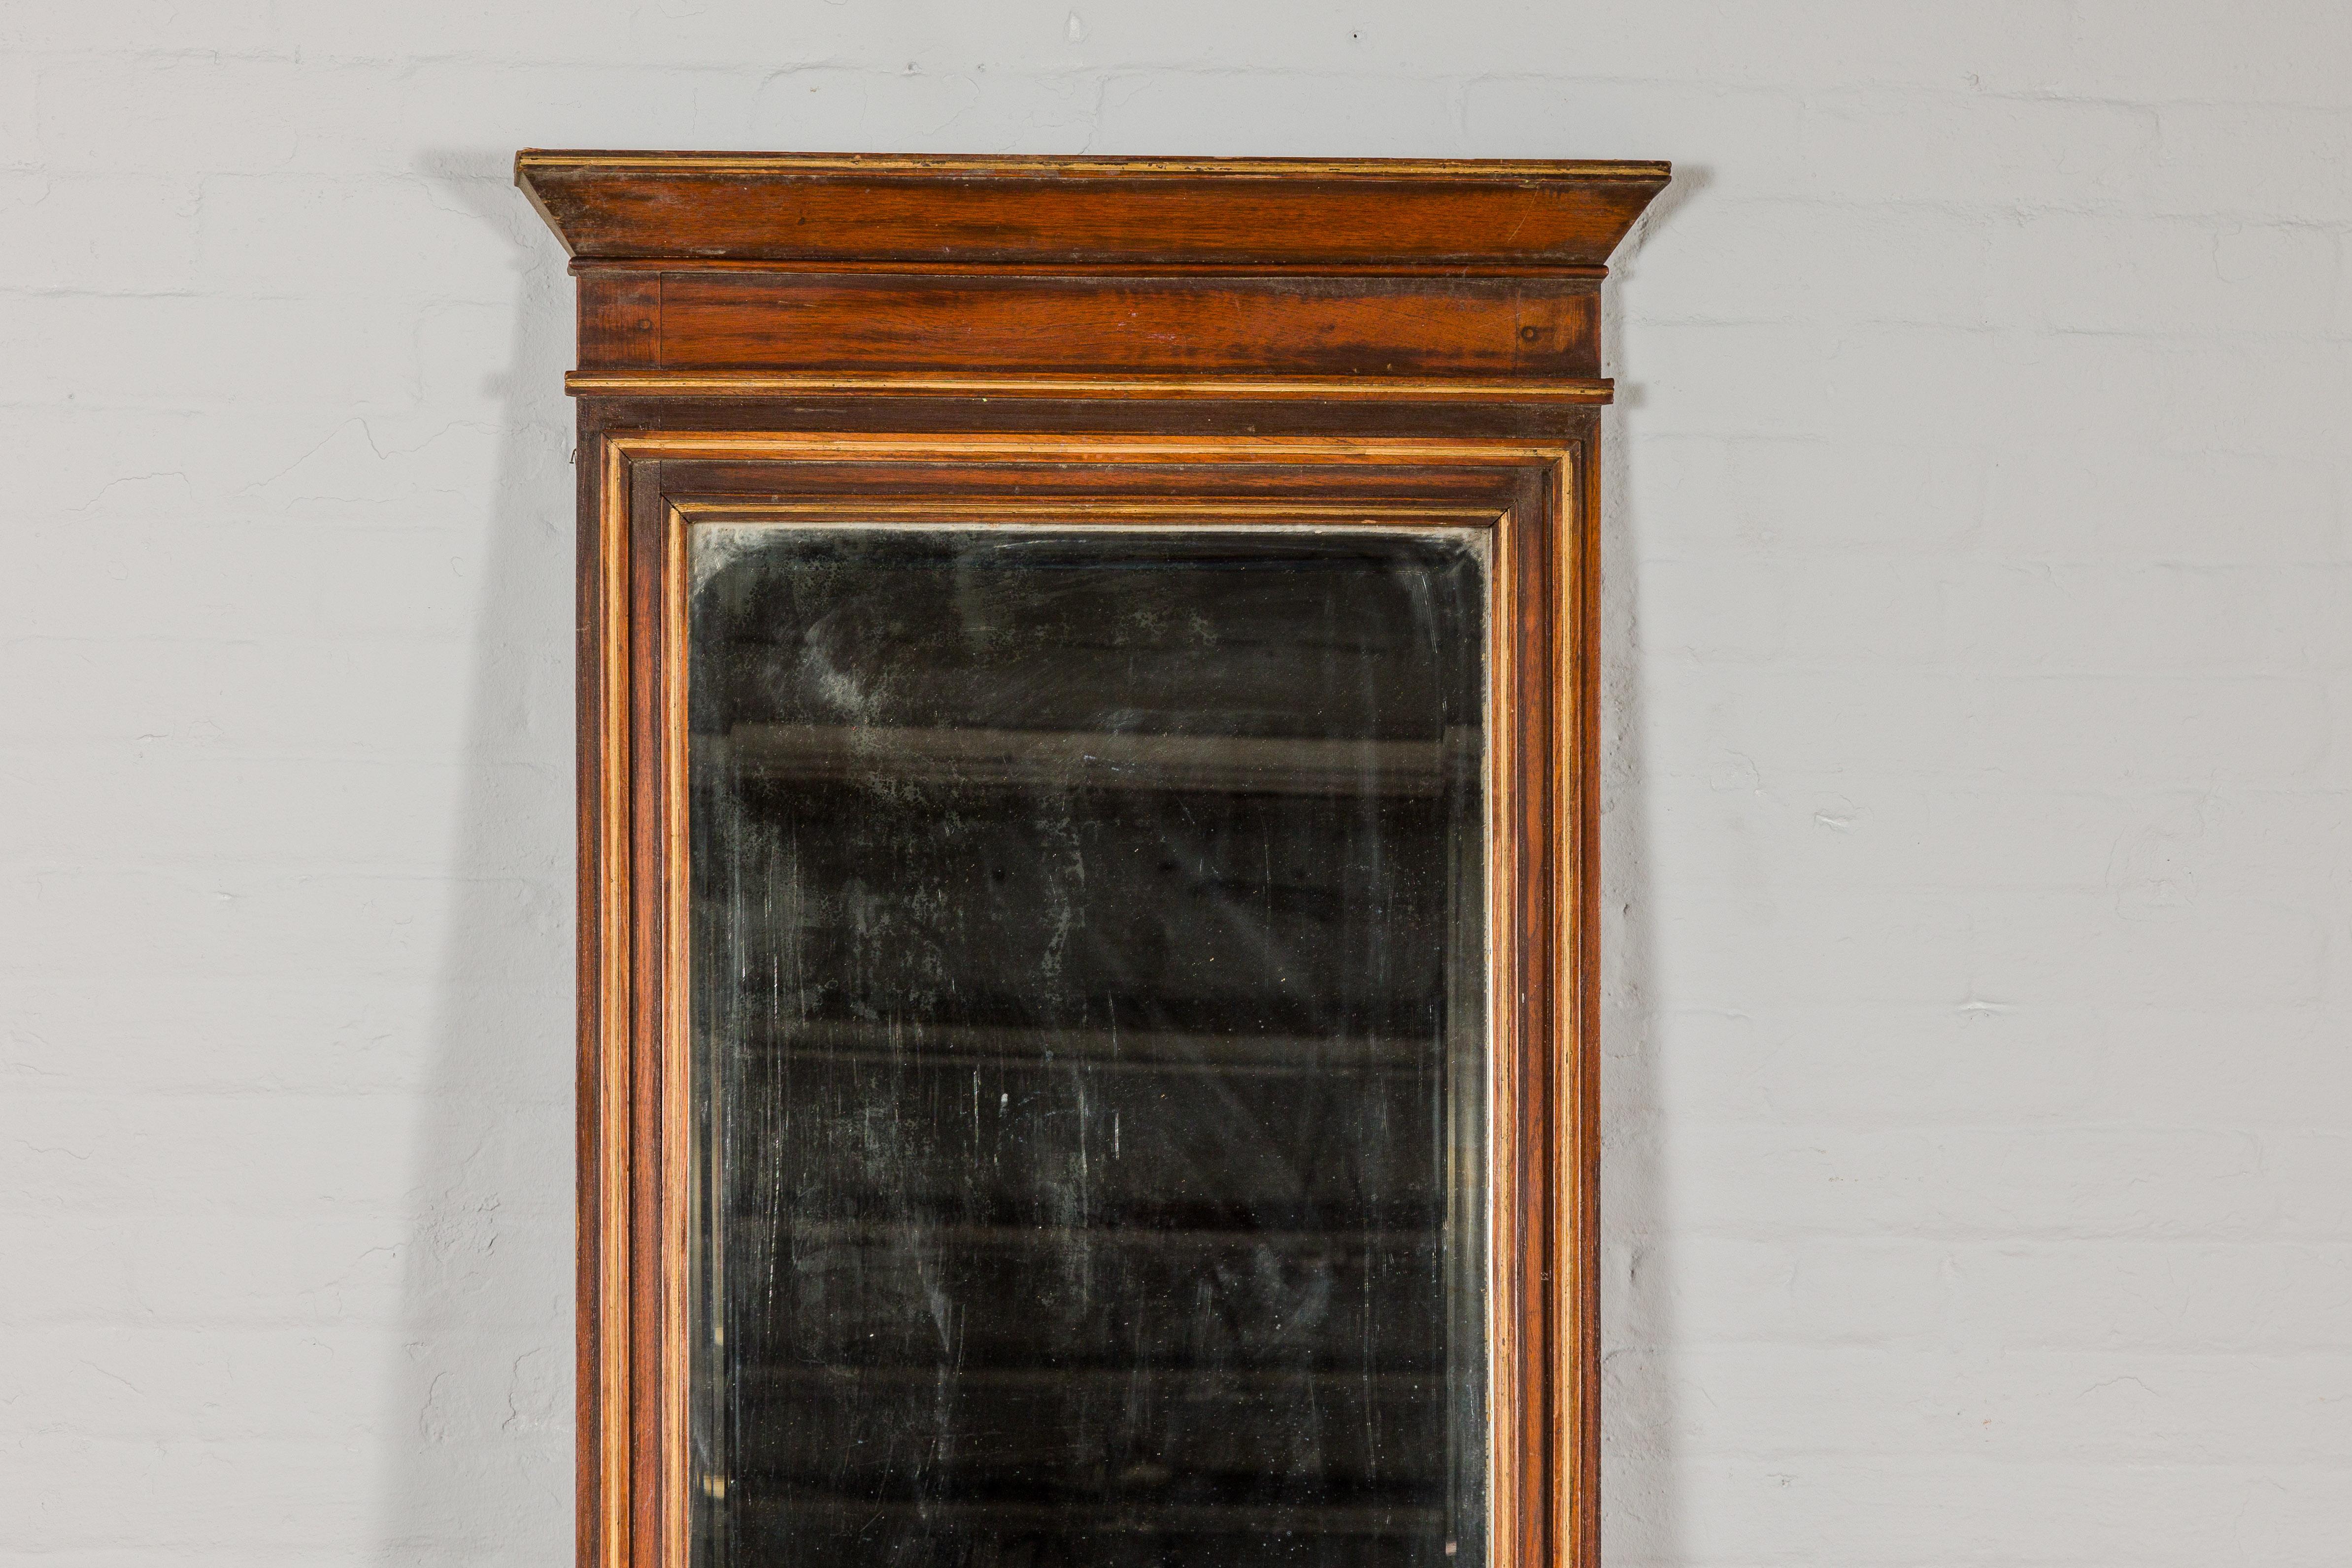 An antique Indian wooden frame made into a trumeau mirror. This antique Indian wooden frame transformed into a trumeau mirror epitomizes understated elegance. Its design is a harmonious blend of simplicity and sophistication, making it a versatile